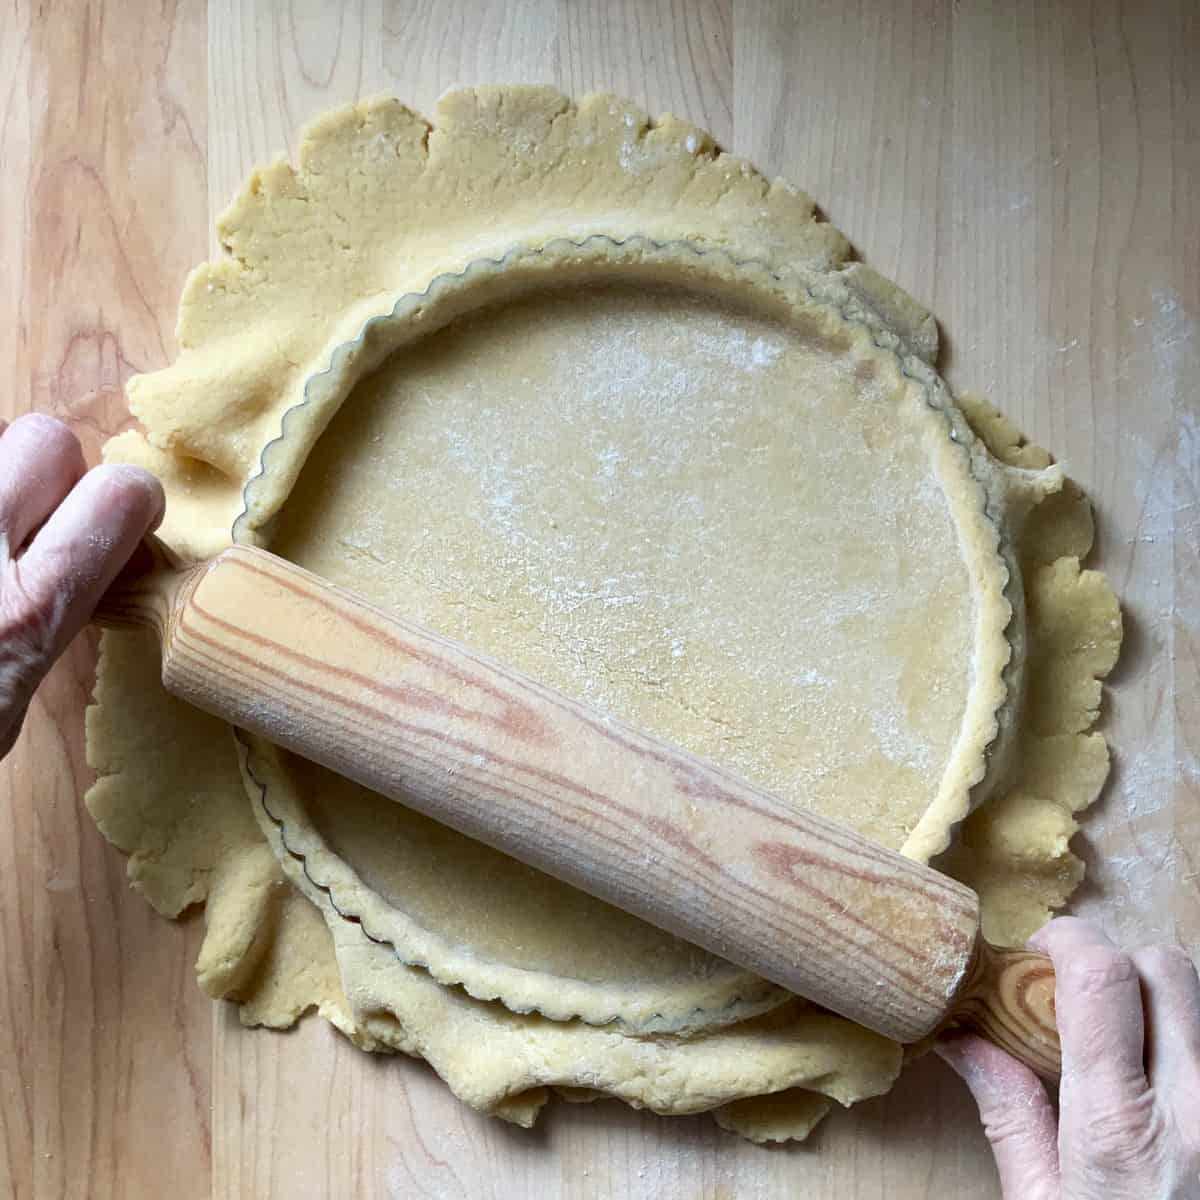 A rolling pin is gently rolling over the top of the tart case to trim away the excess dough.